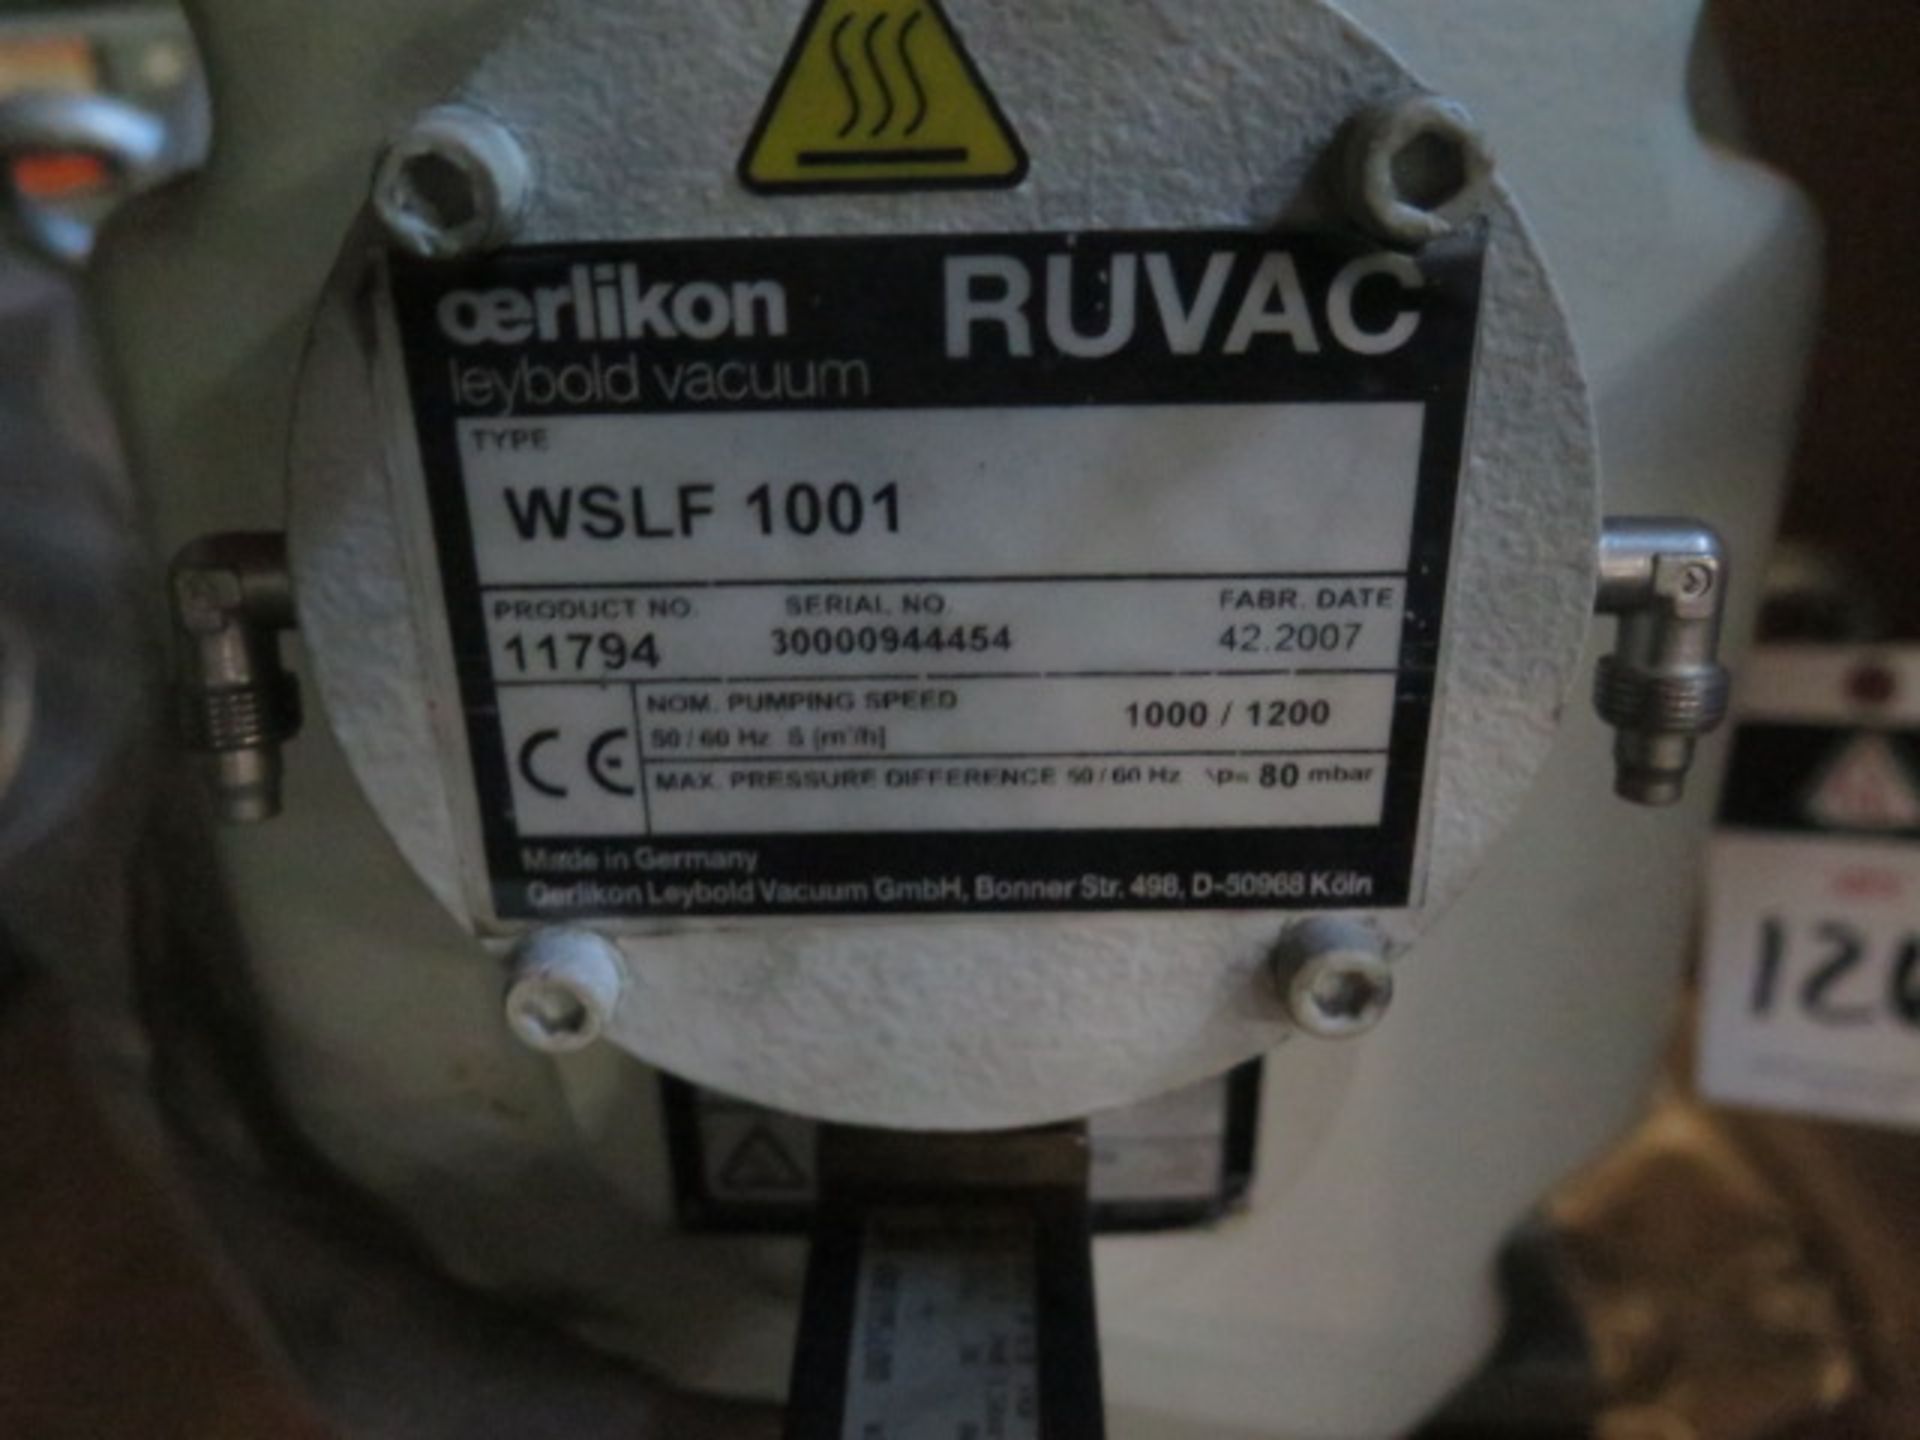 Ruvac WSLF 1001 Vacuum Compressors (2) (SOLD AS-IS - NO WARRANTY) - Image 3 of 5